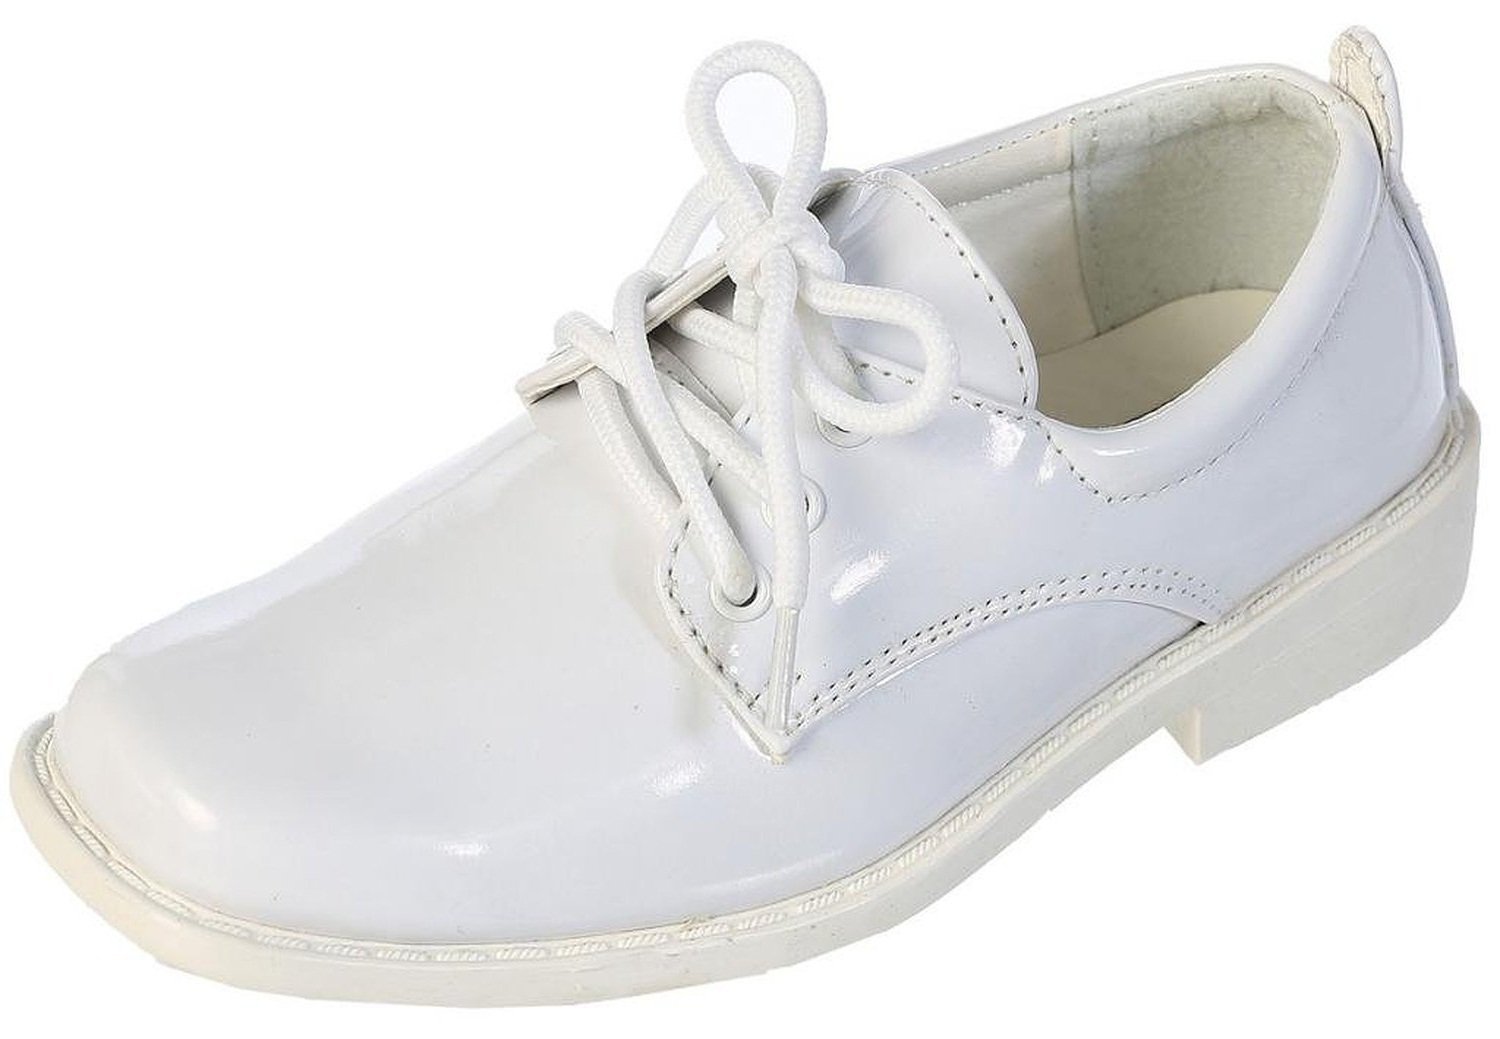 Boys Square Toe Lace Up Oxford Patent Dress Shoes - Available in White 1 Little Kid